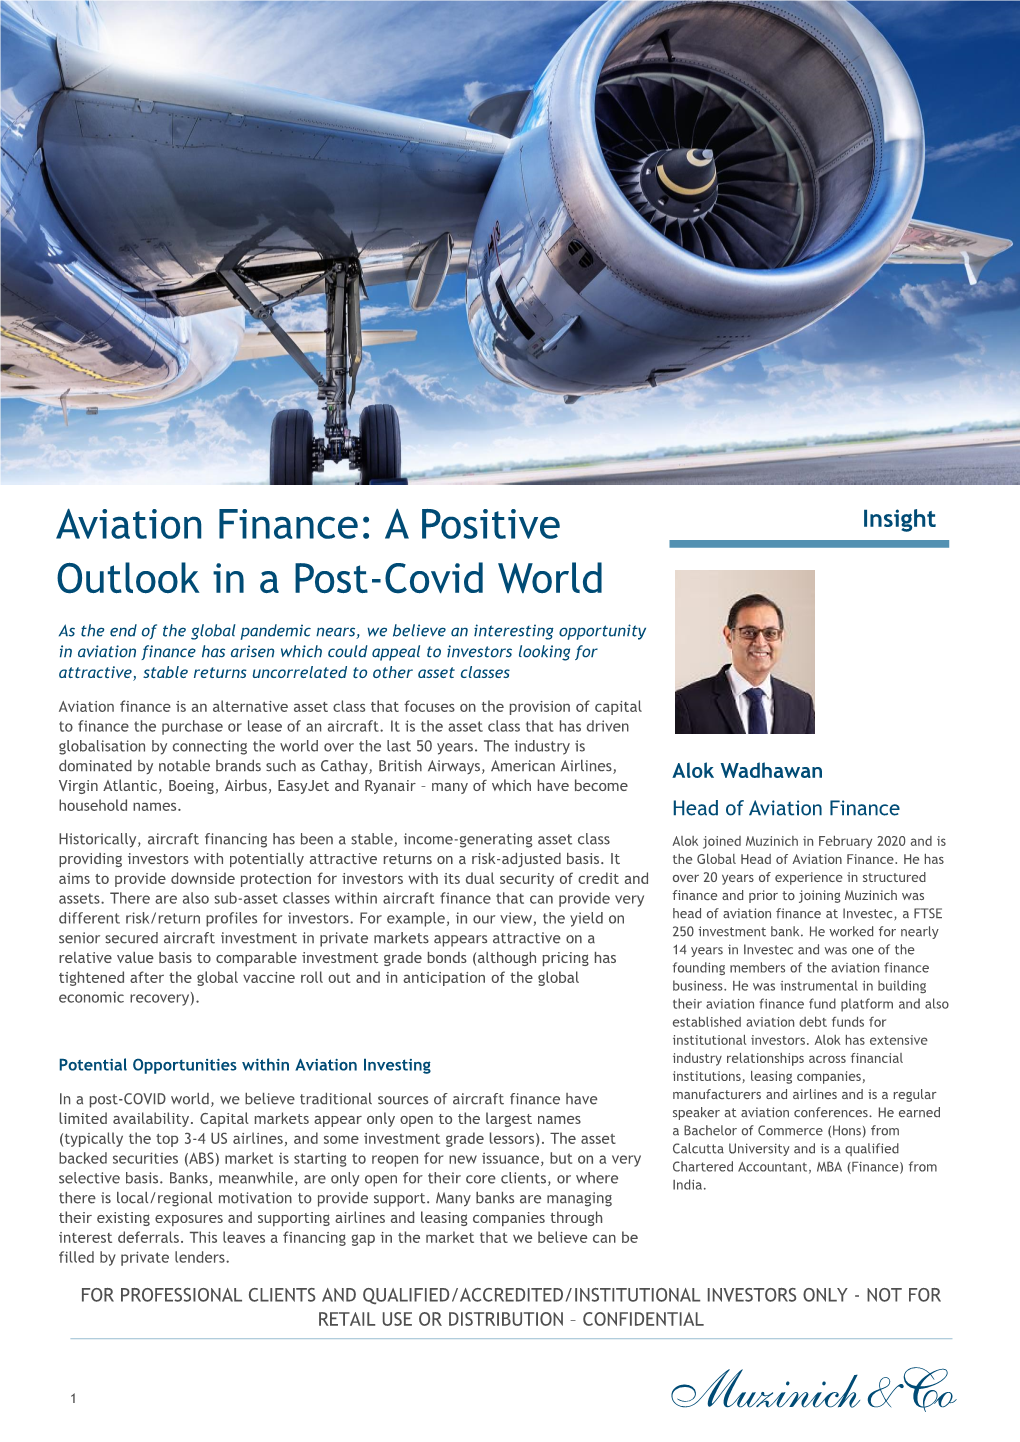 Aviation Finance: a Positive Outlook in a Post-Covid World